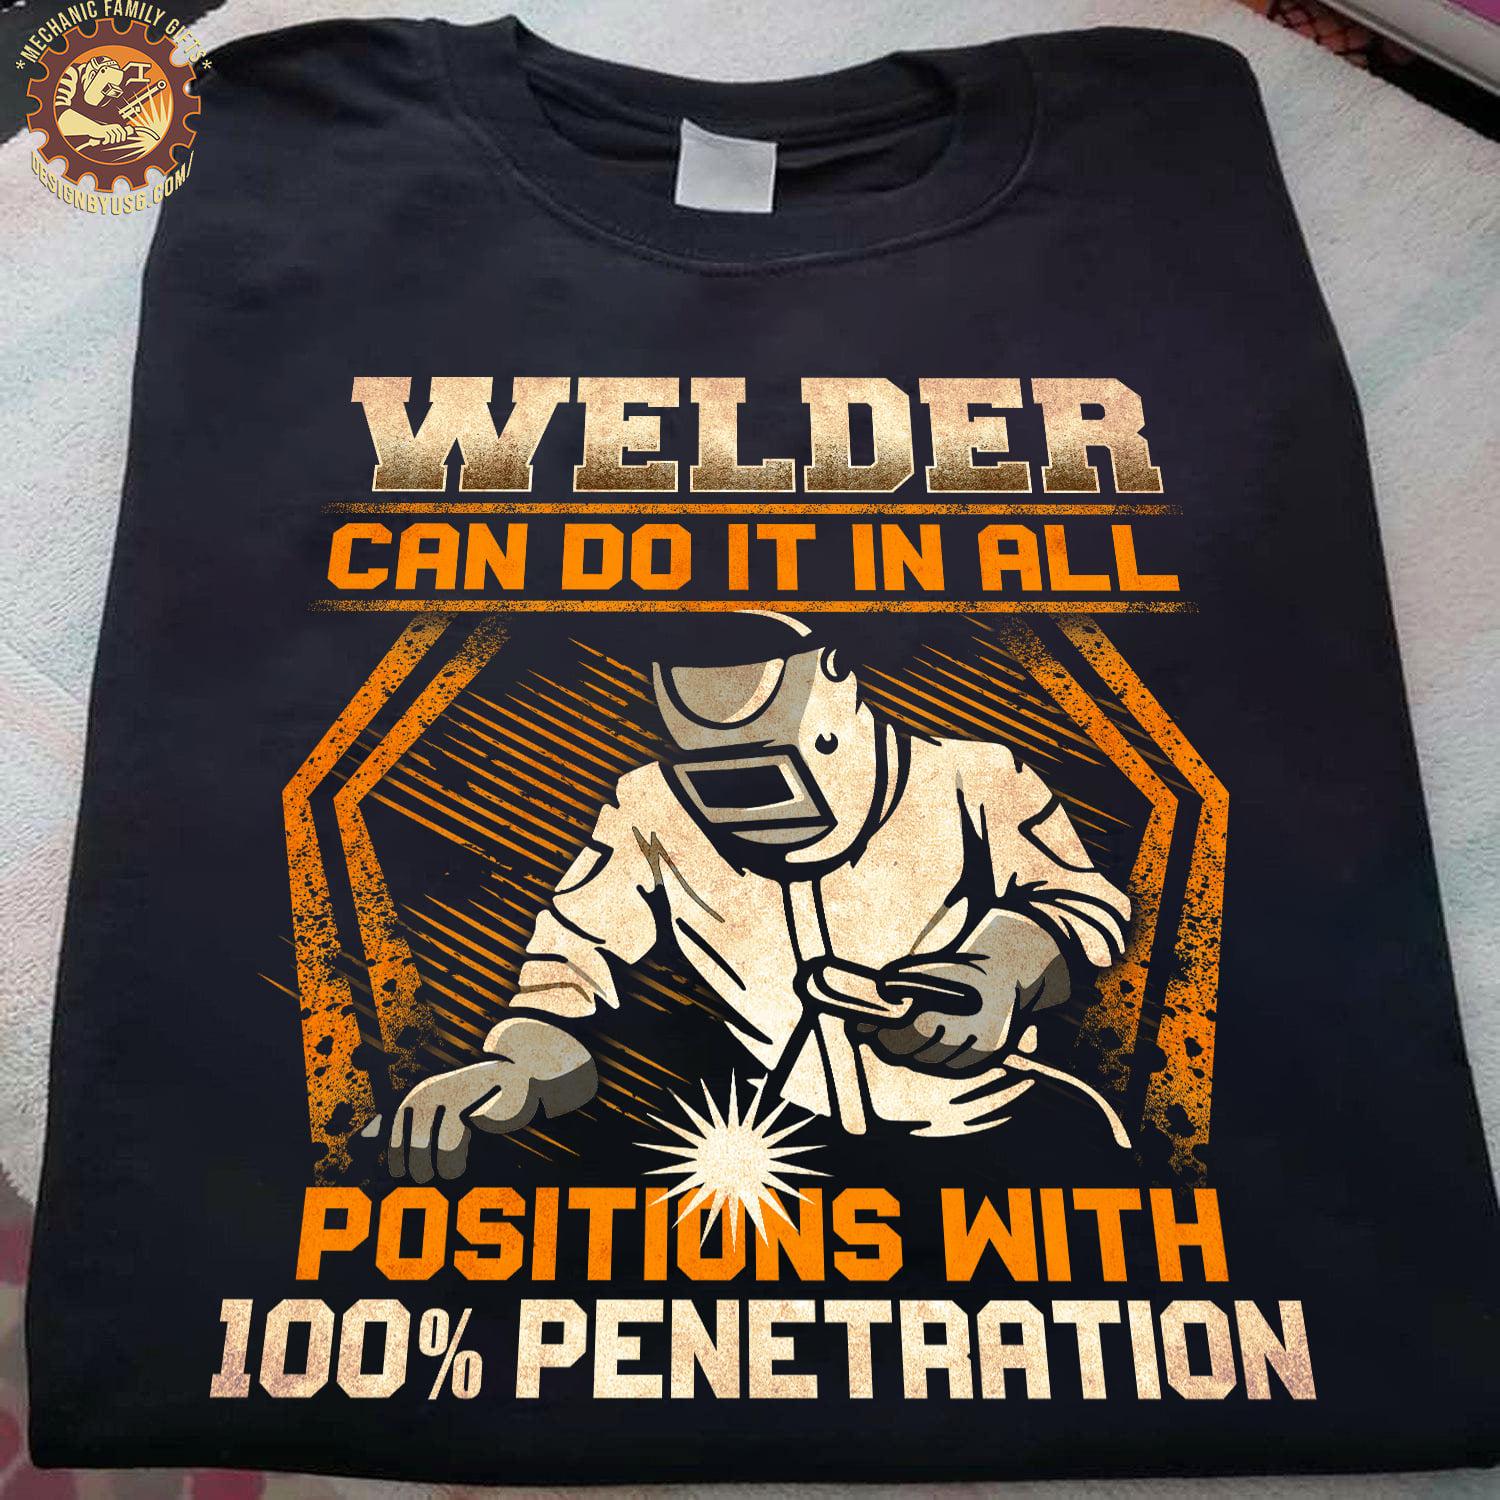 Welder The Job - Welder can do it in all positions with 100% penetration